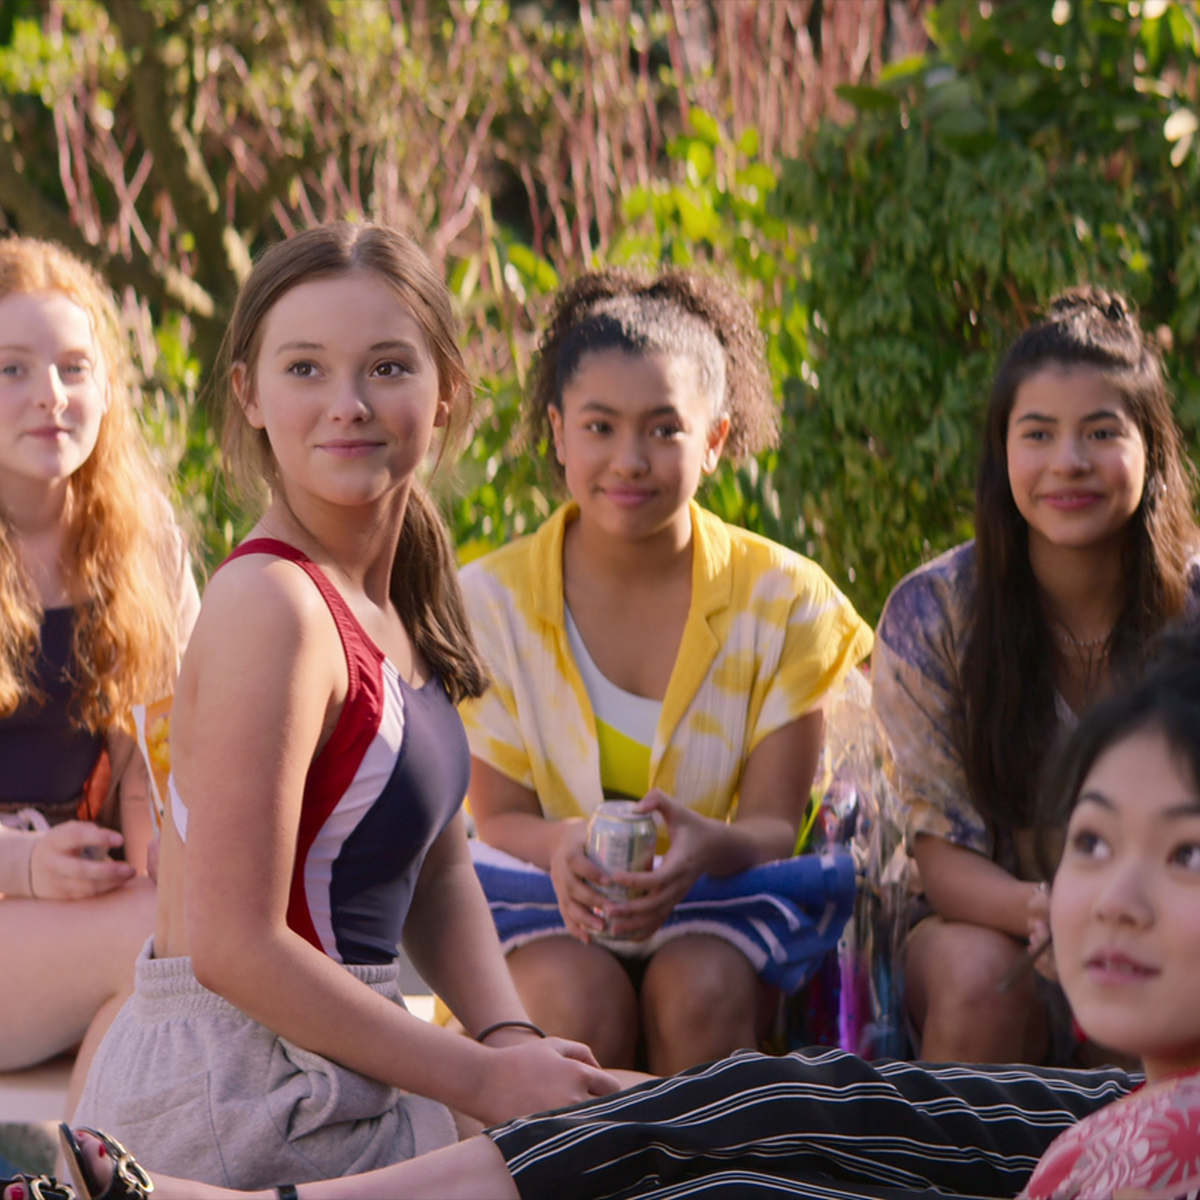 Meet the New Dawn in The Baby-Sitters Club Trailer